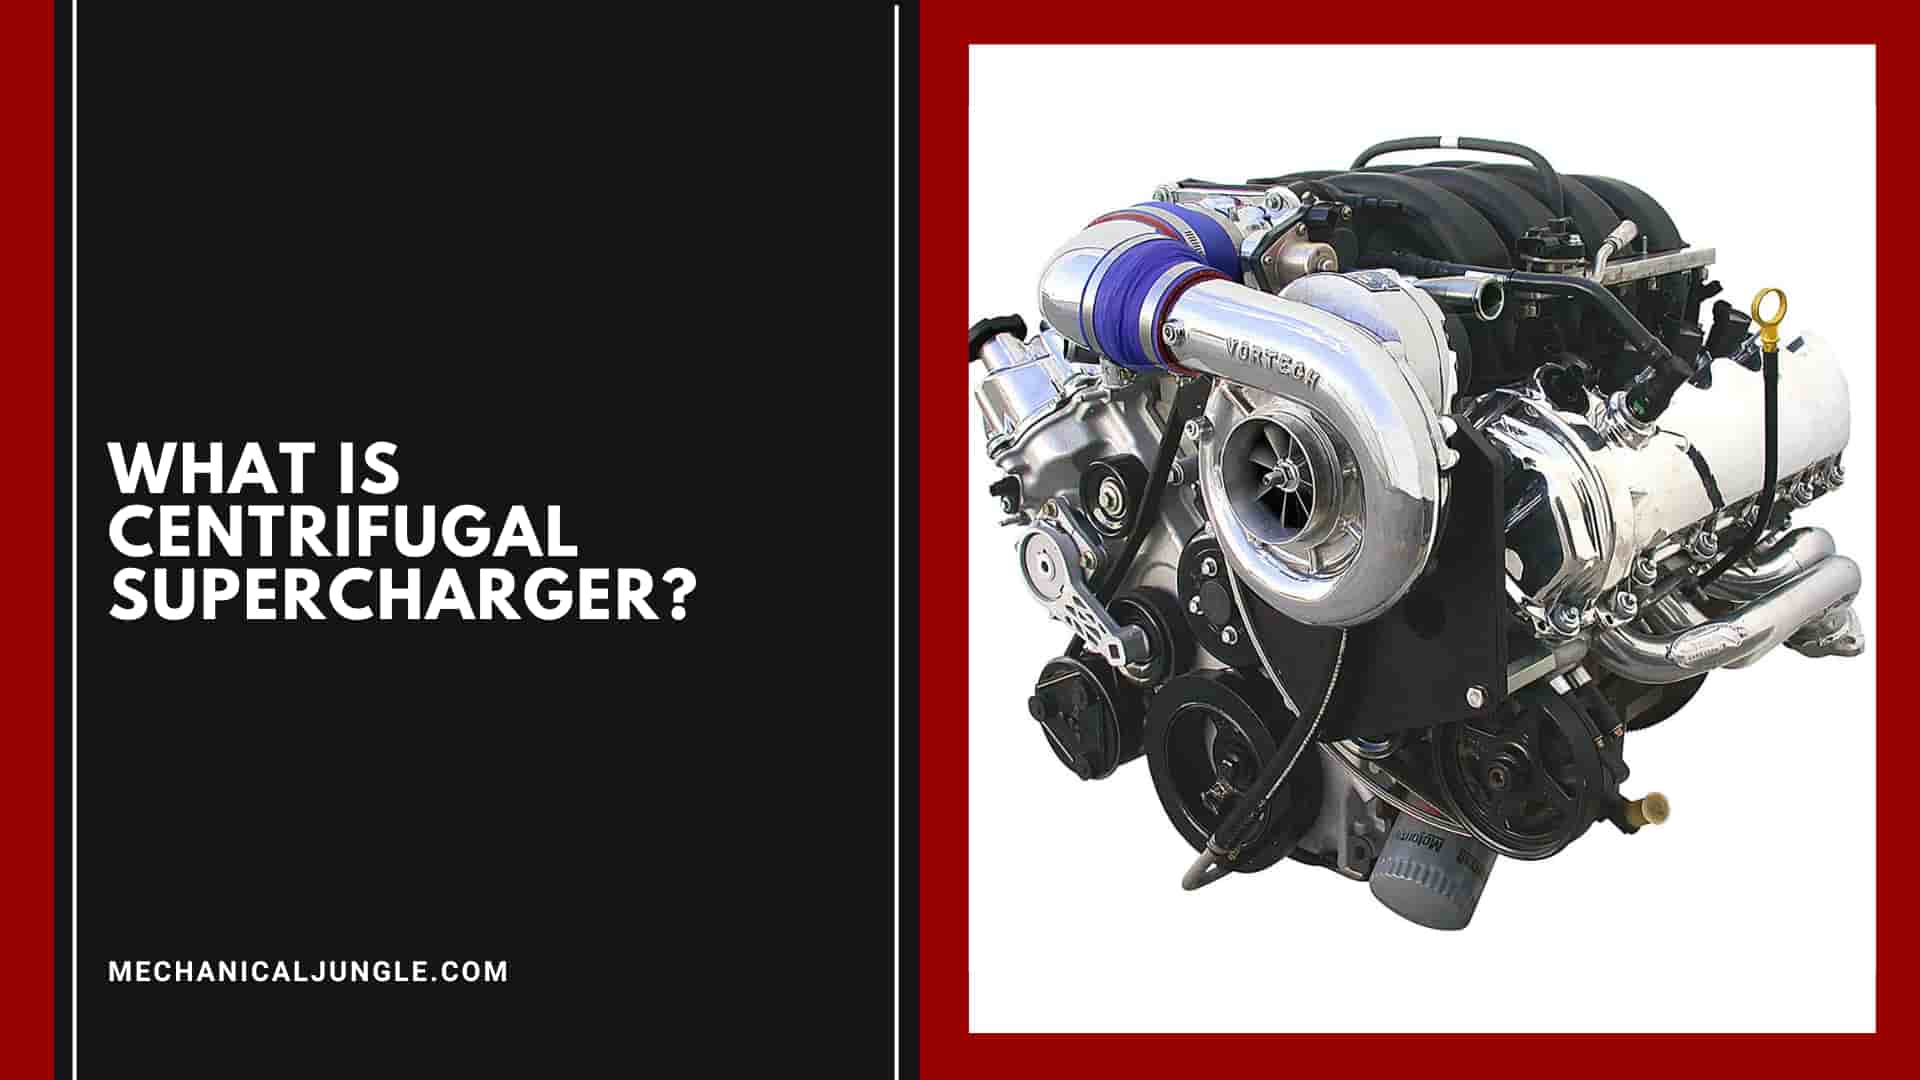 What Is Centrifugal Supercharger?